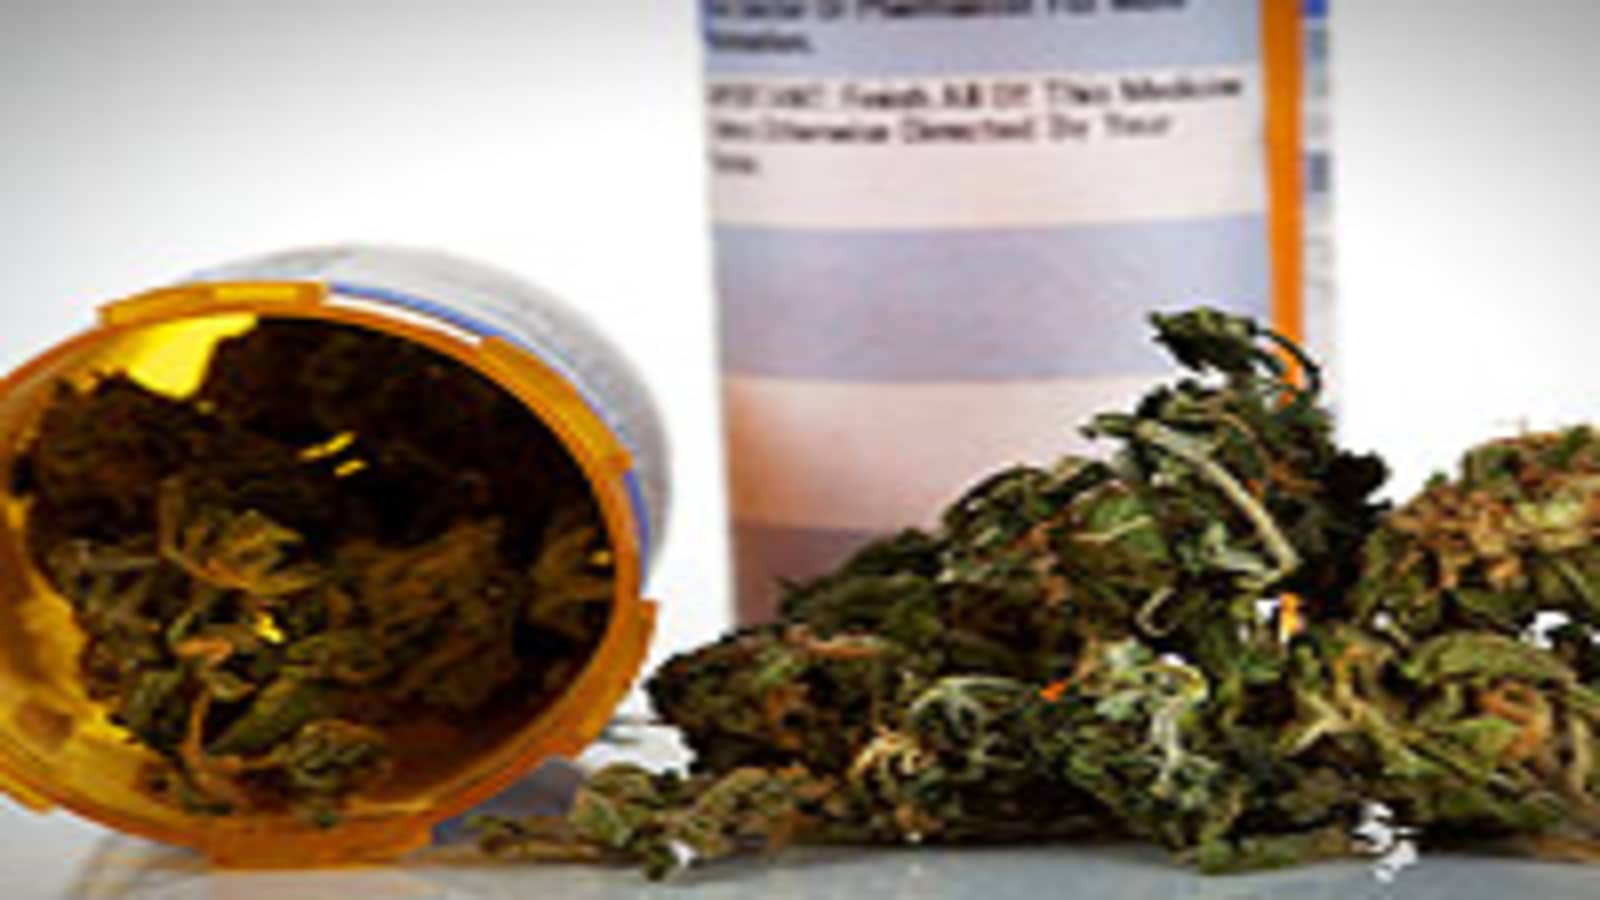 Should Your HSA Pay for Pot?